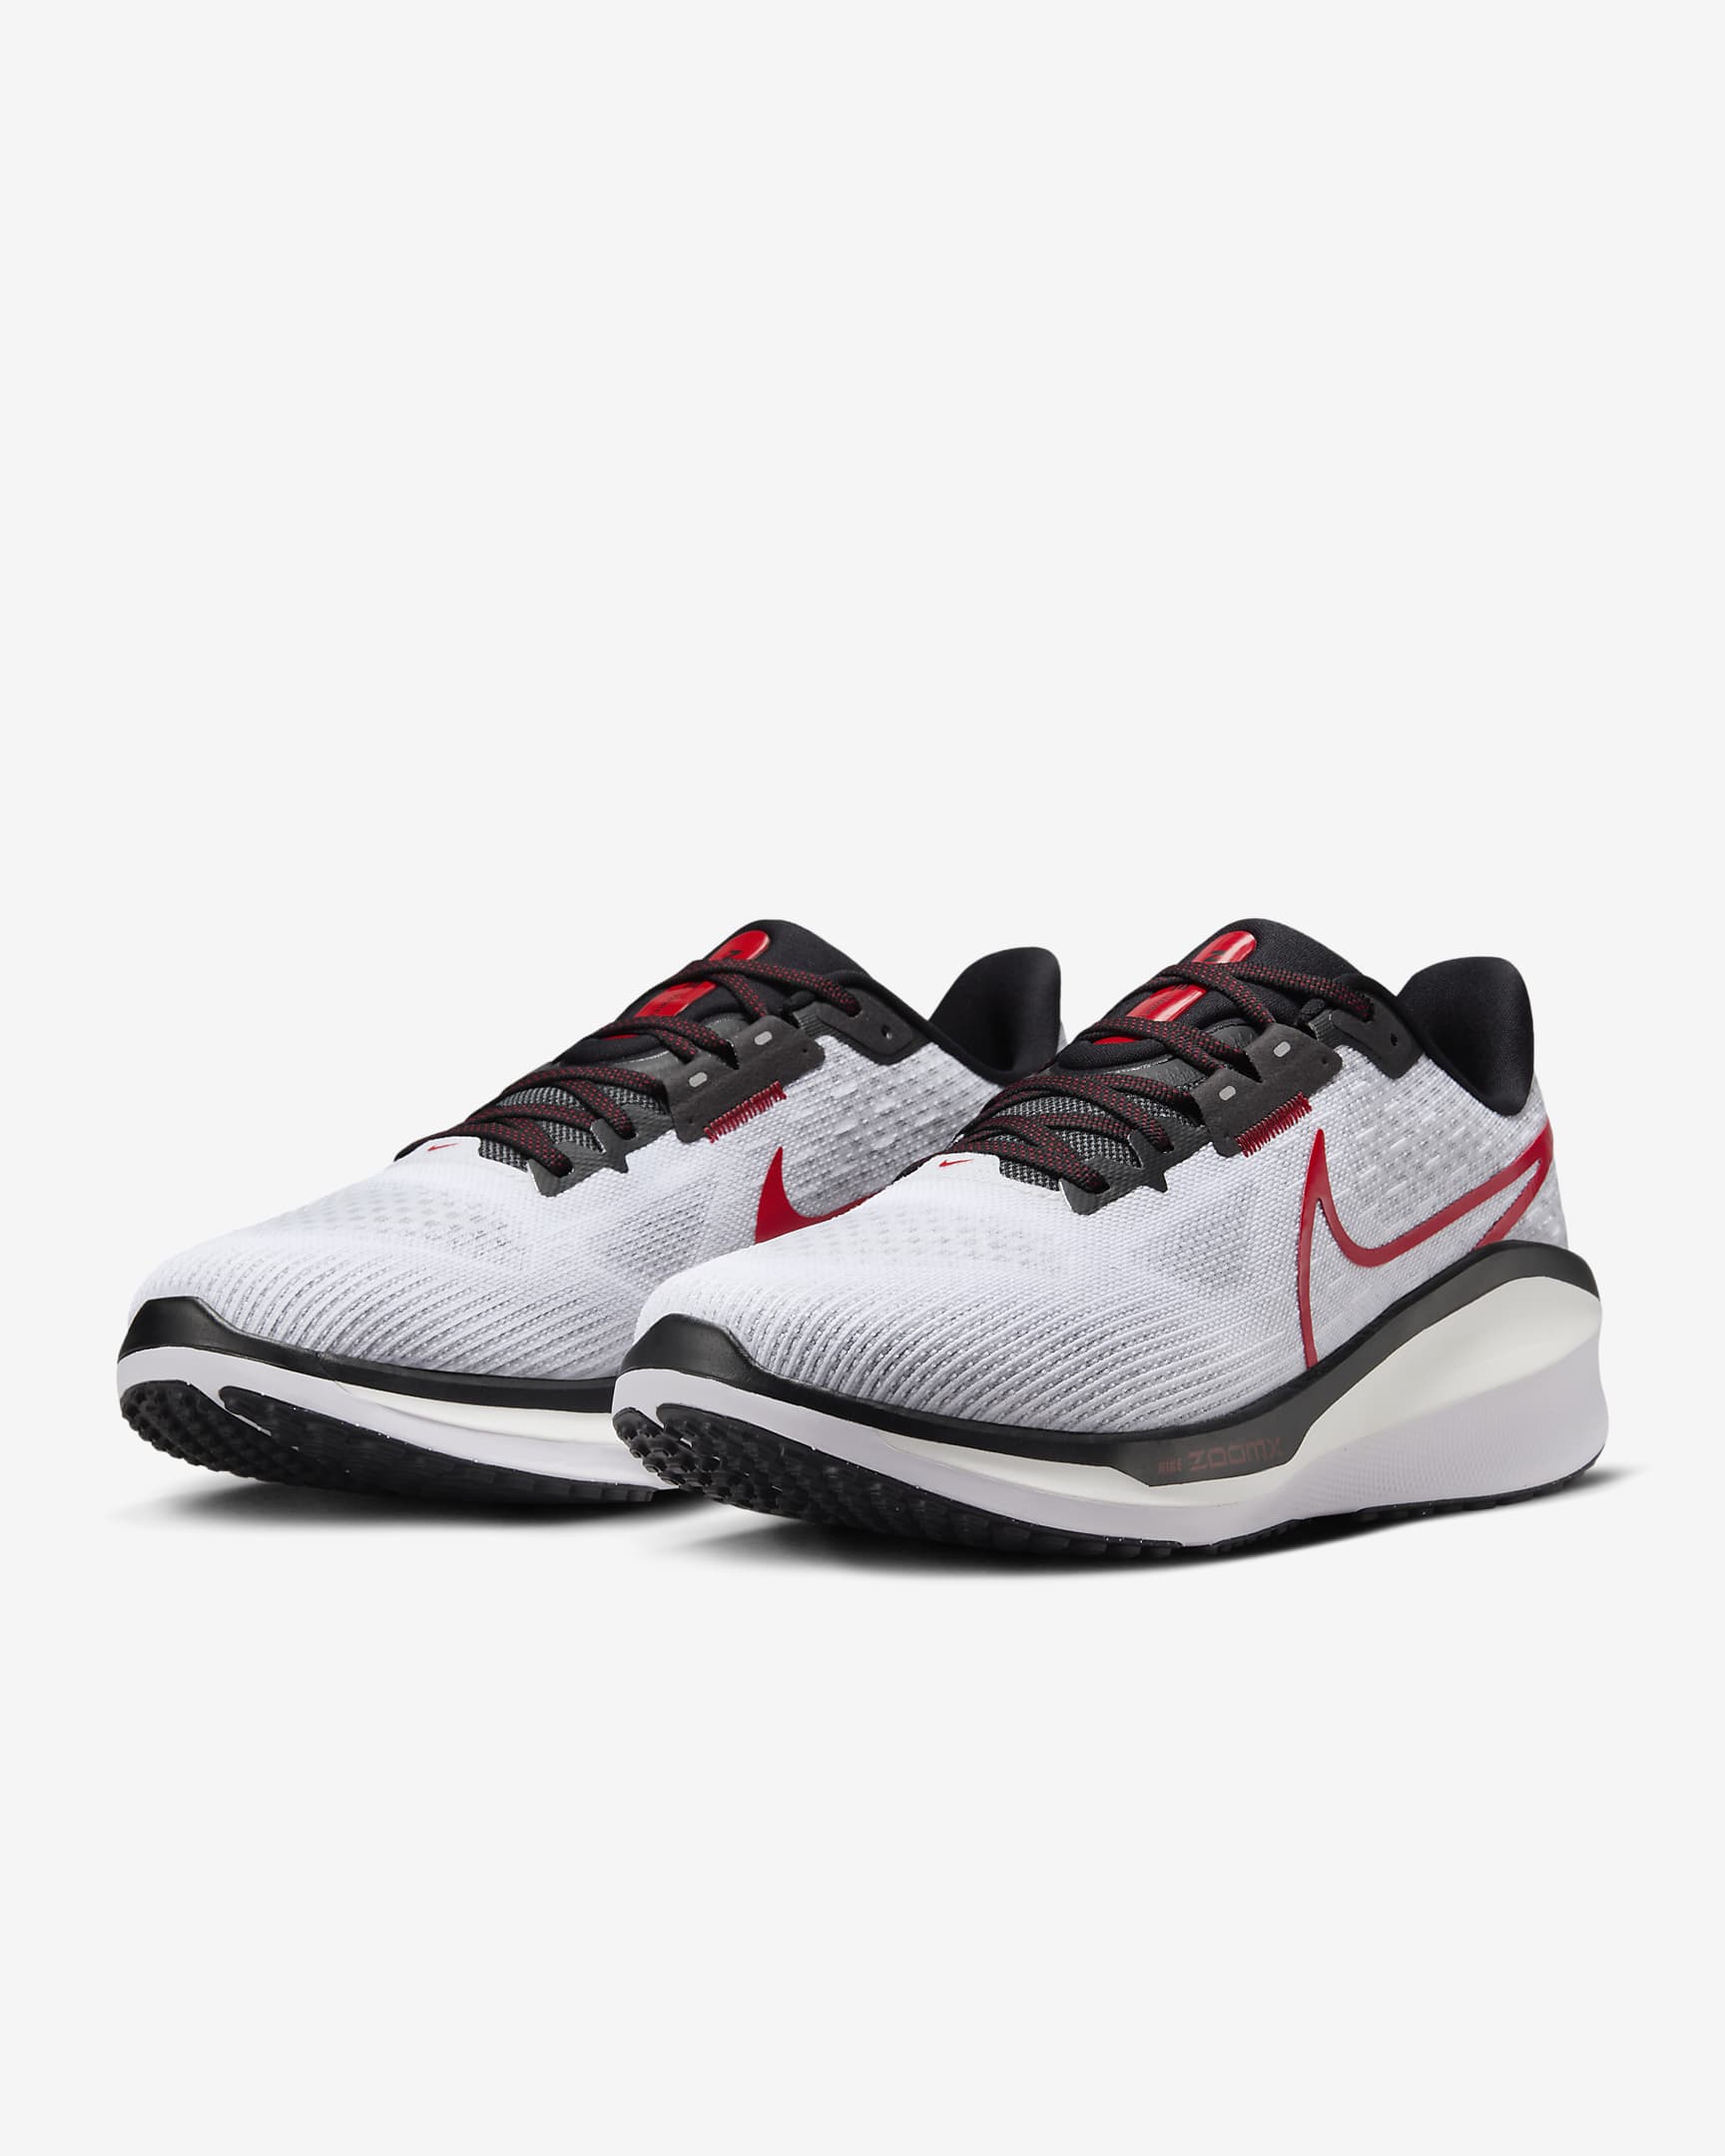 Nike Vomero 17 Men's Road Running Shoes - White/Fire Red/Platinum Tint/Black